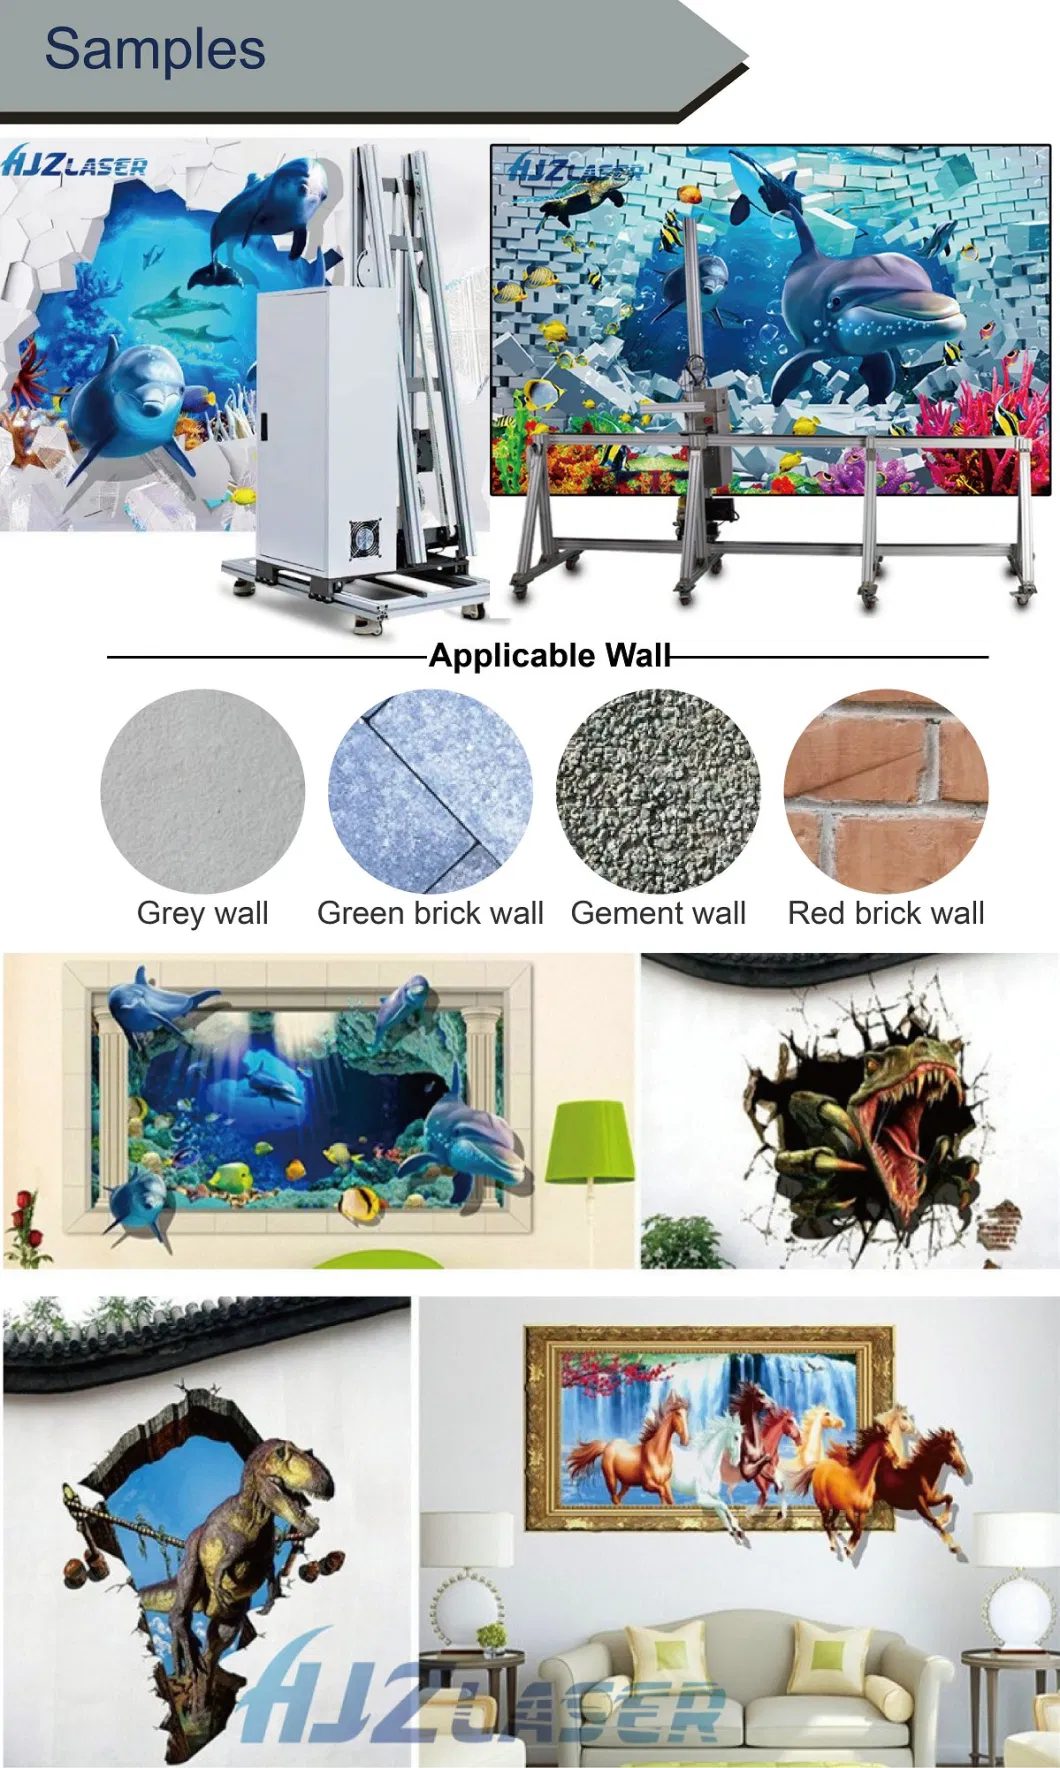 3D Inkjet Direct Mural Painting Zeescape Wall Printer Wall Printing Machine